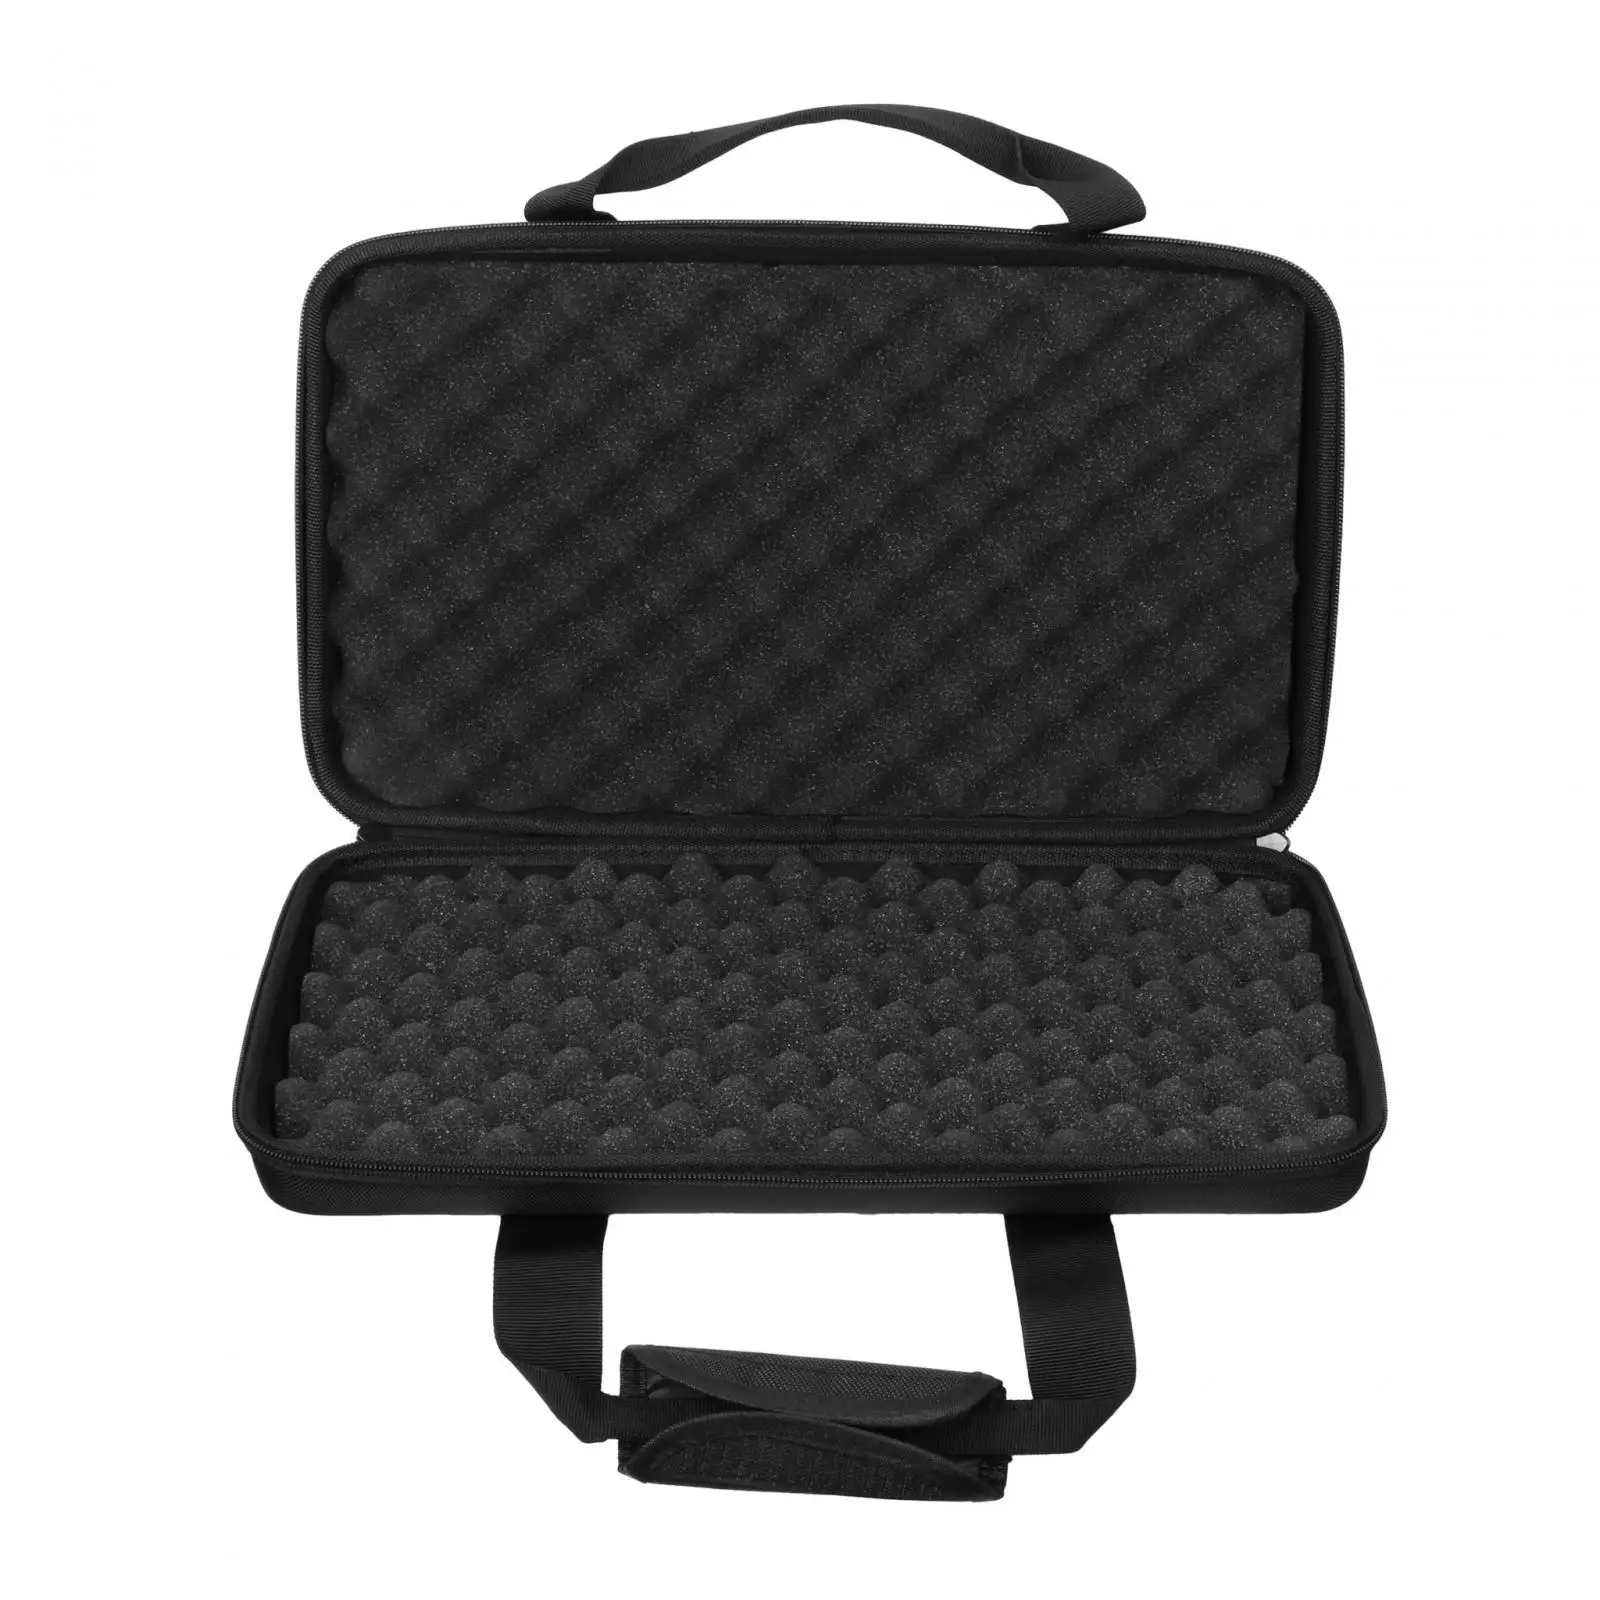 EVA with Portable Handle Waterproof for 400 DJ Equipment Case for Travel